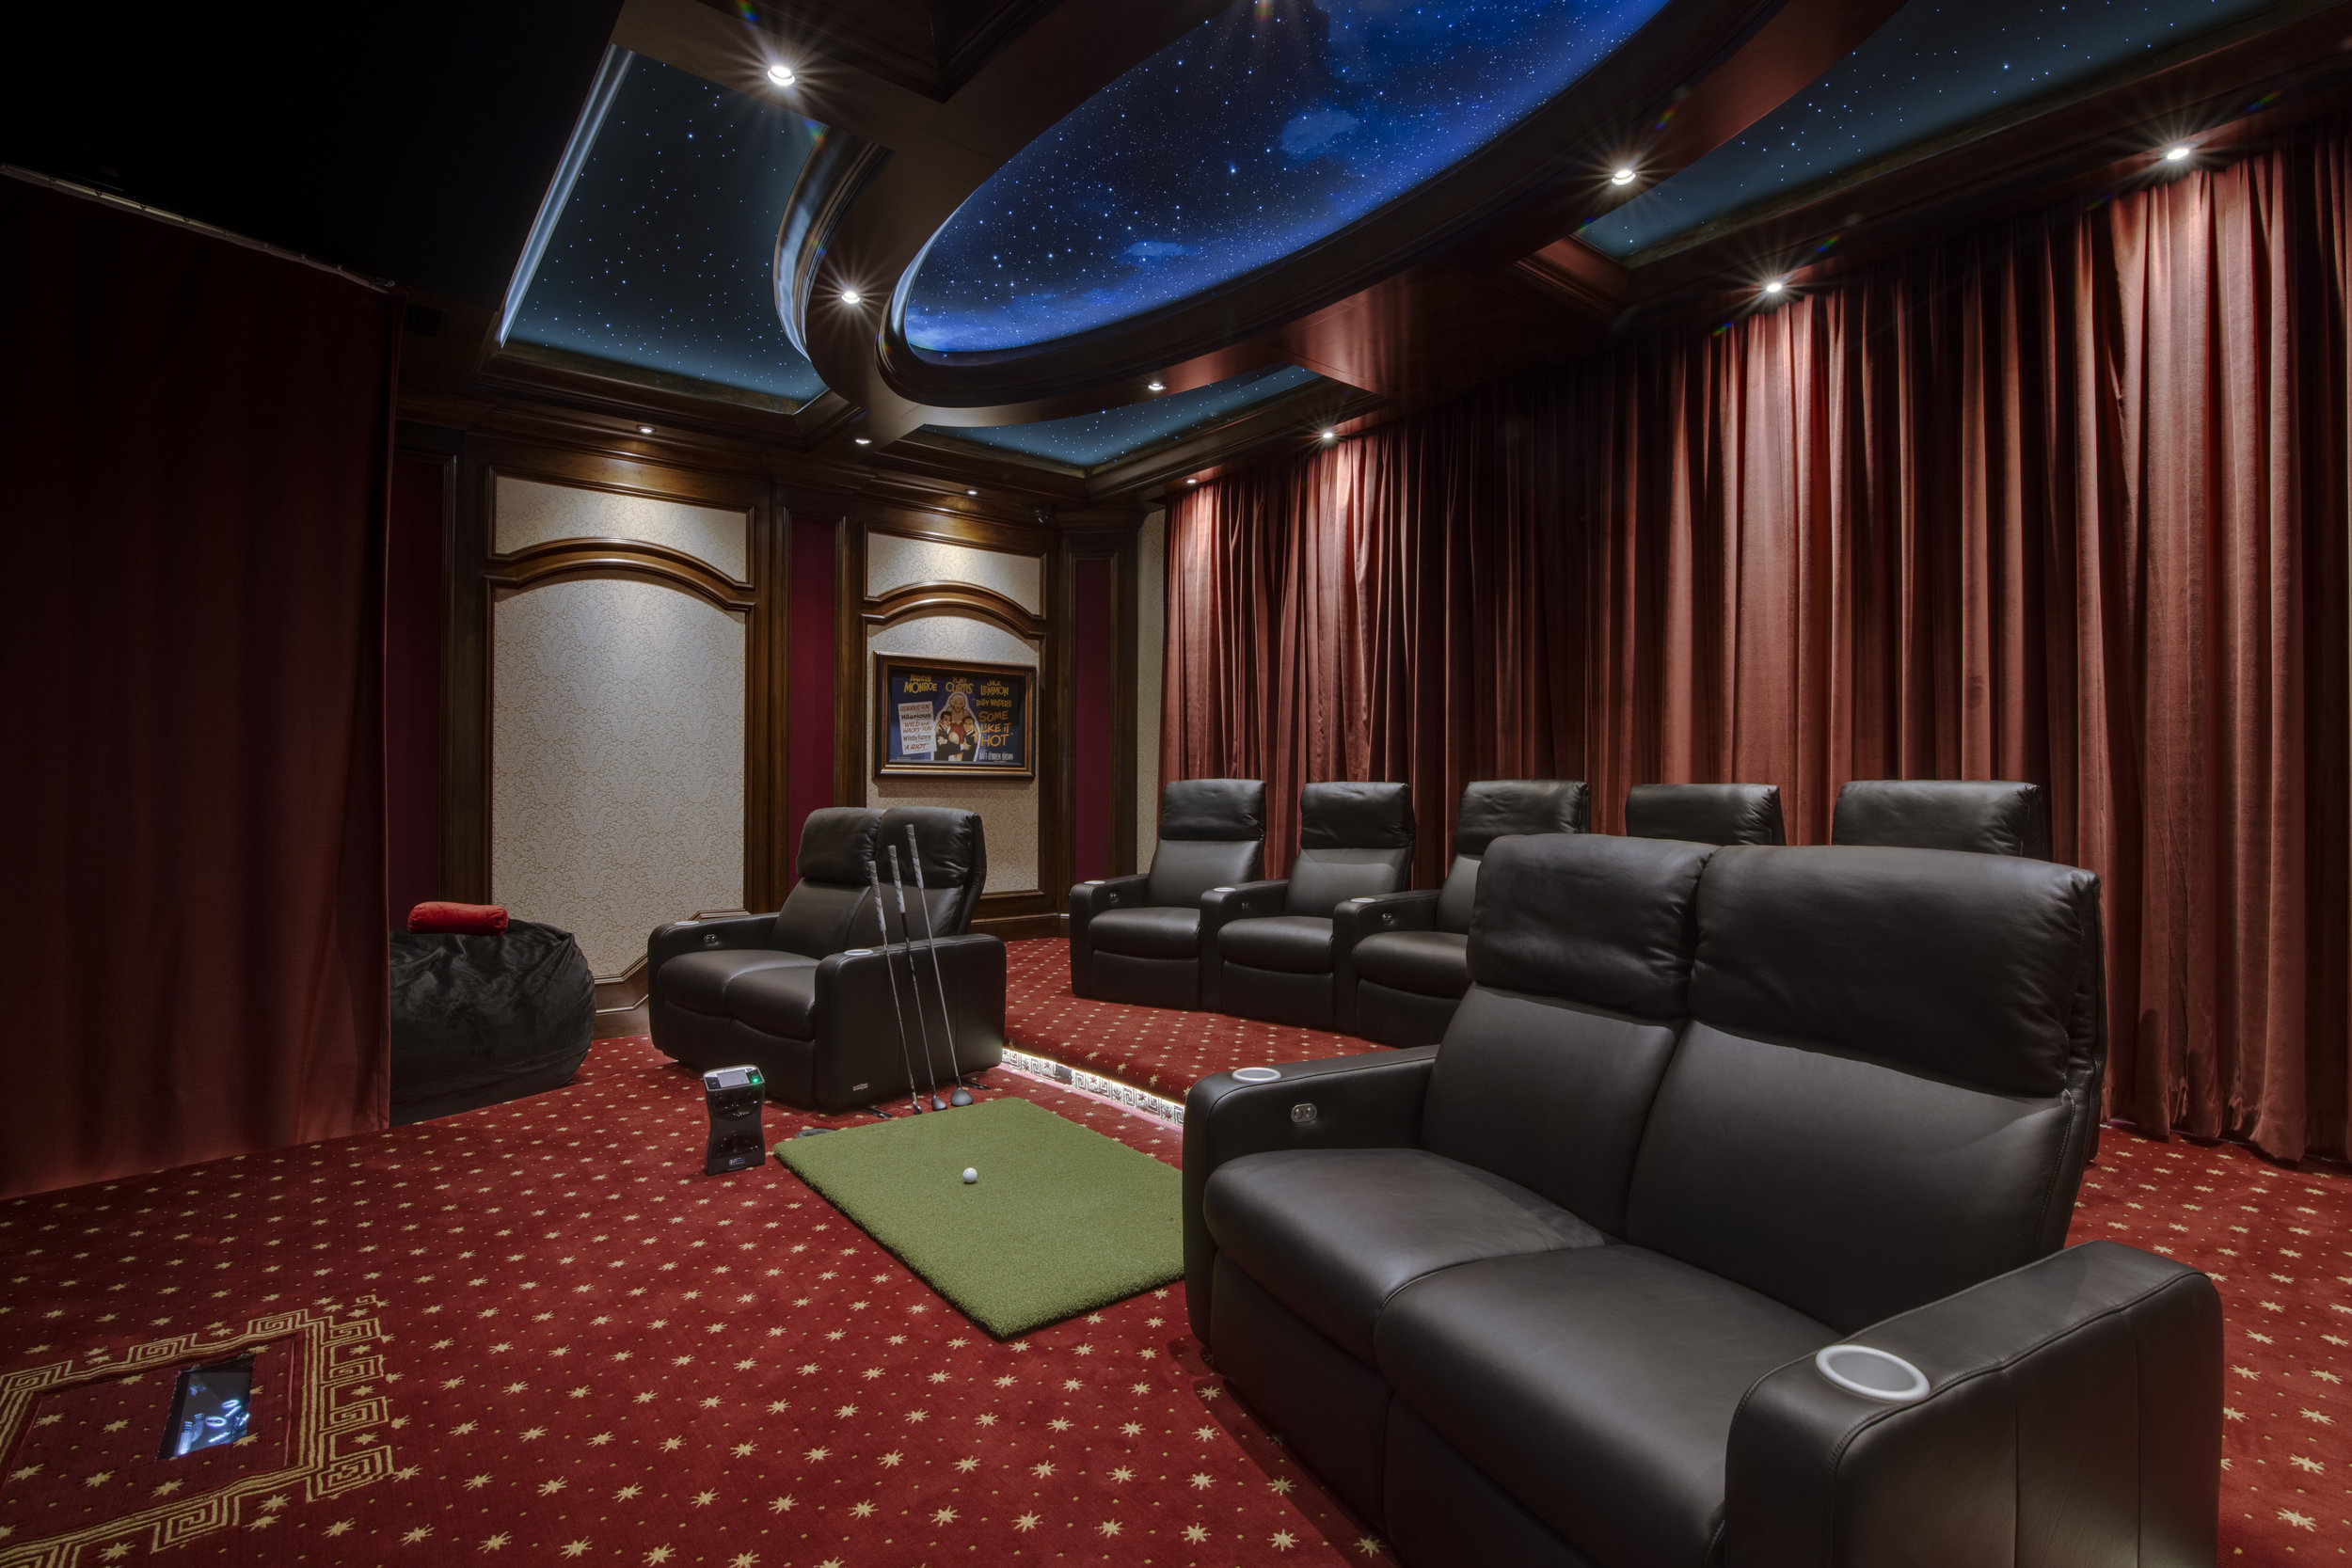 Home Theater Lighting: Illuminating The Night At Home